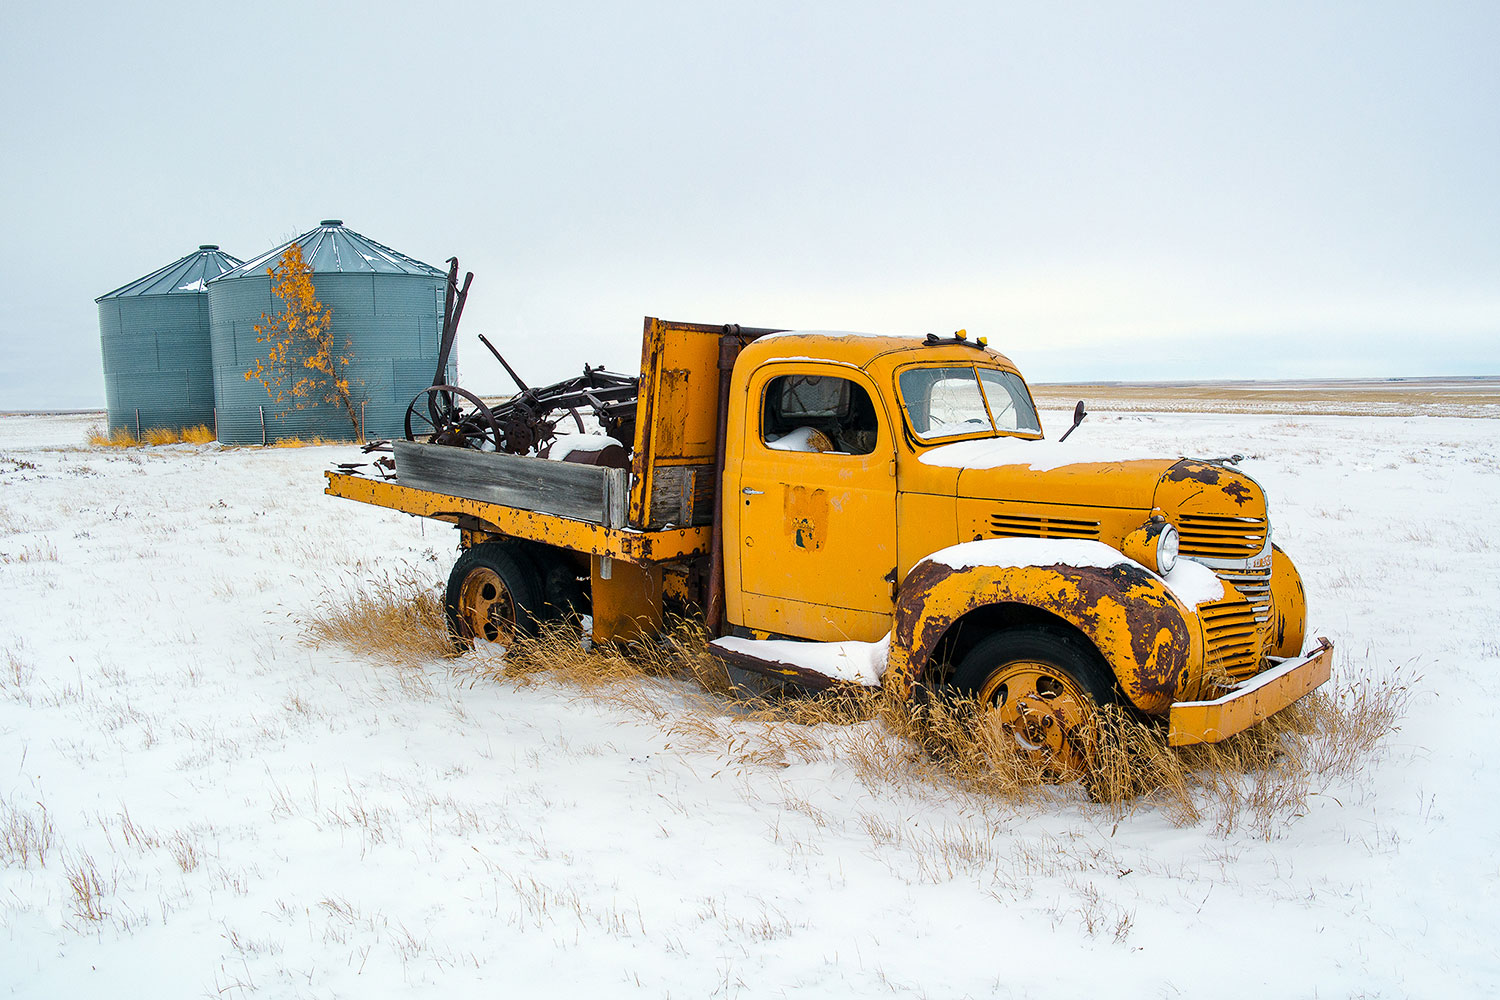 An old, abandoned, yellow Dodge pick-up truck rotting away in a cold, snow-blown field outside of Inverness, Montana.&nbsp;→ Buy This Print